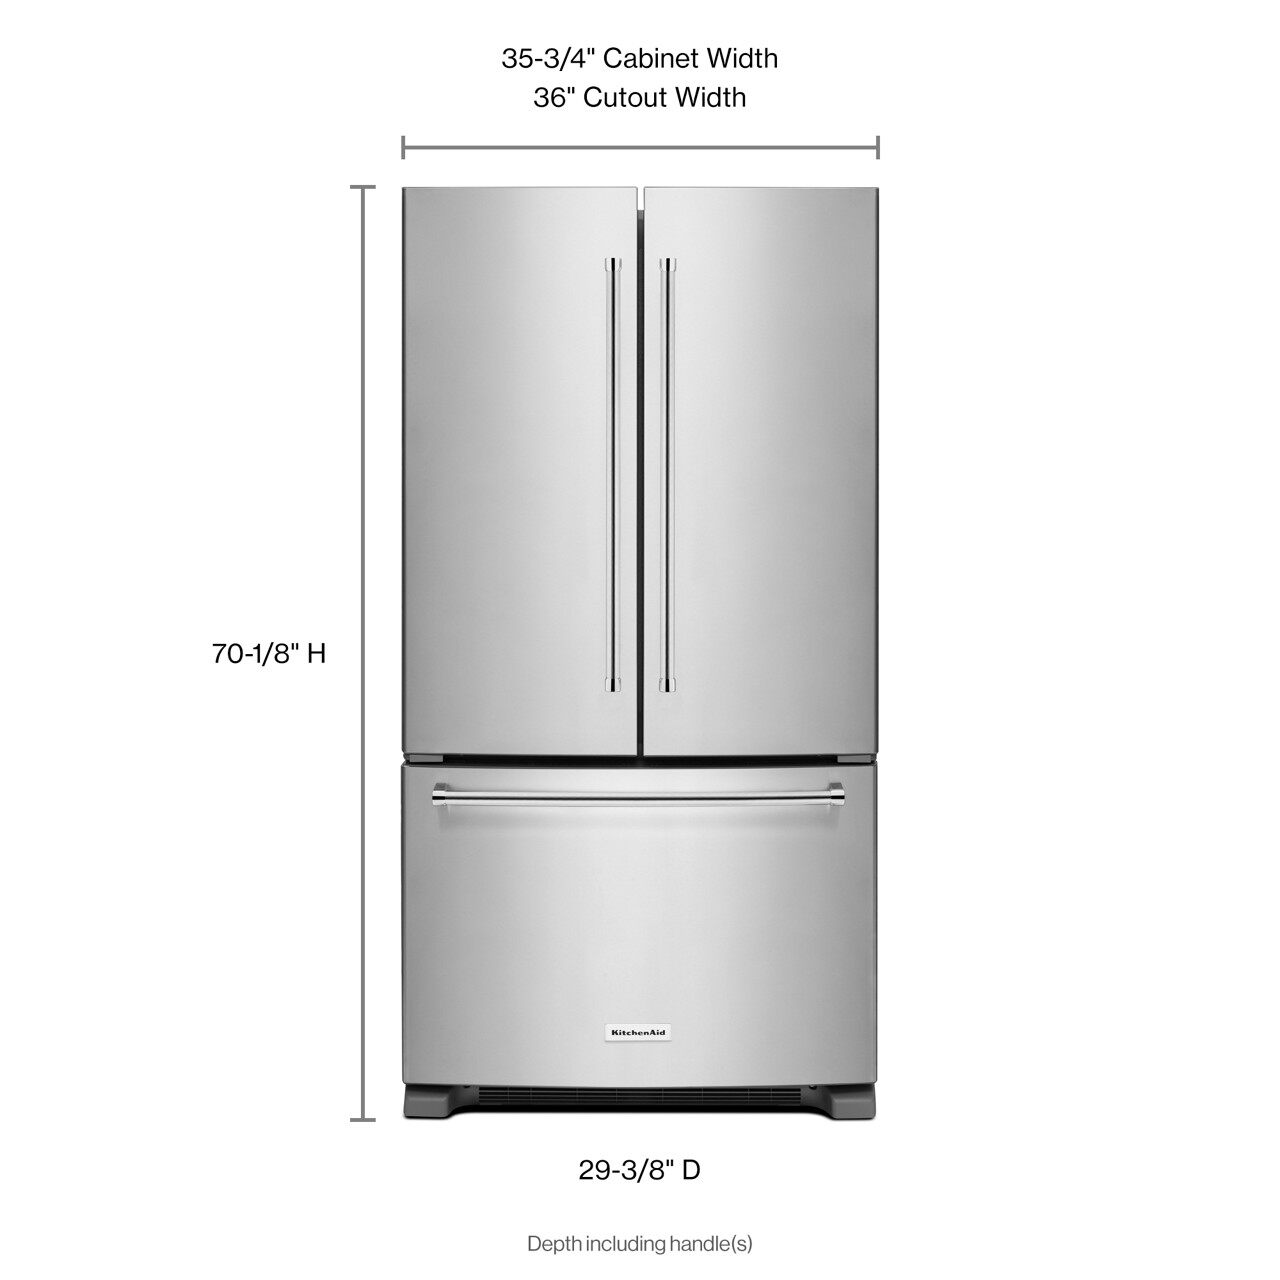 A graphic showing the height, width, and depth of the KitchenAid KRFC300ESS French door refrigerator 